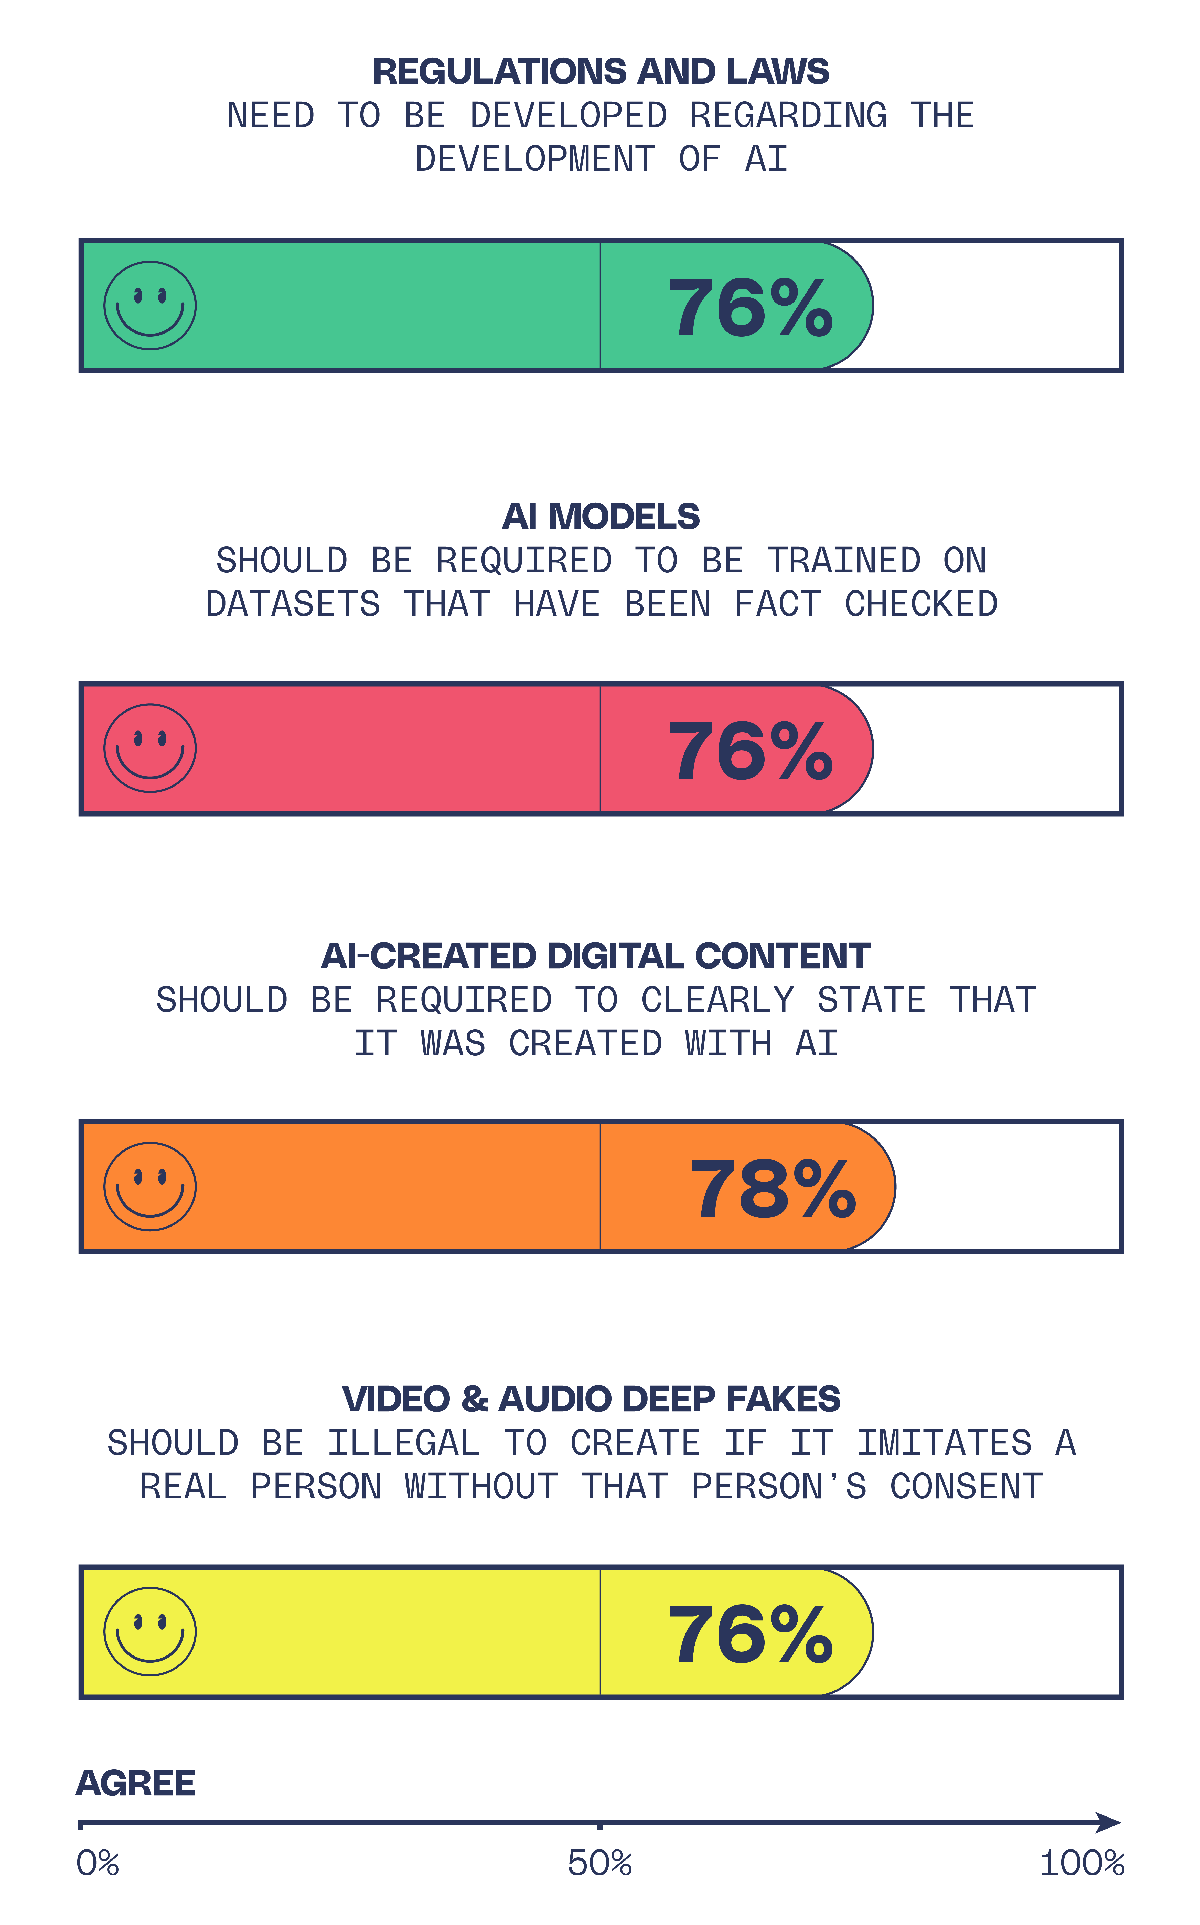 A new survey from The Verge and Vox Media shows broad support for regulations on AI. Cr: The Verge